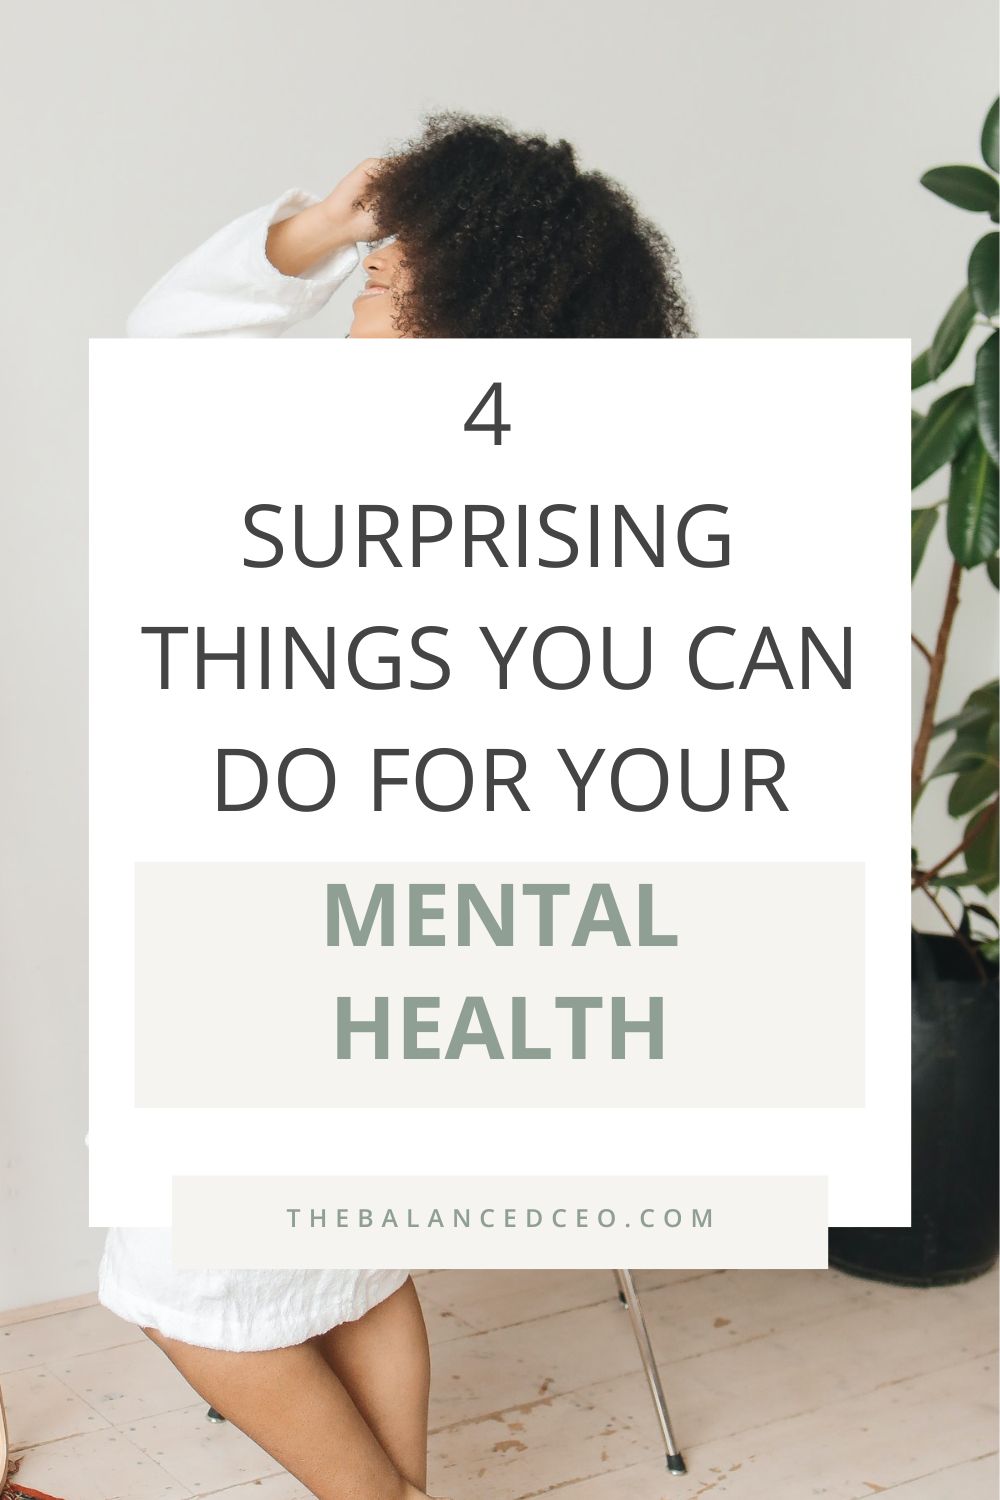 Here are 4 Surprising Things You Can Do for Your Mental Health